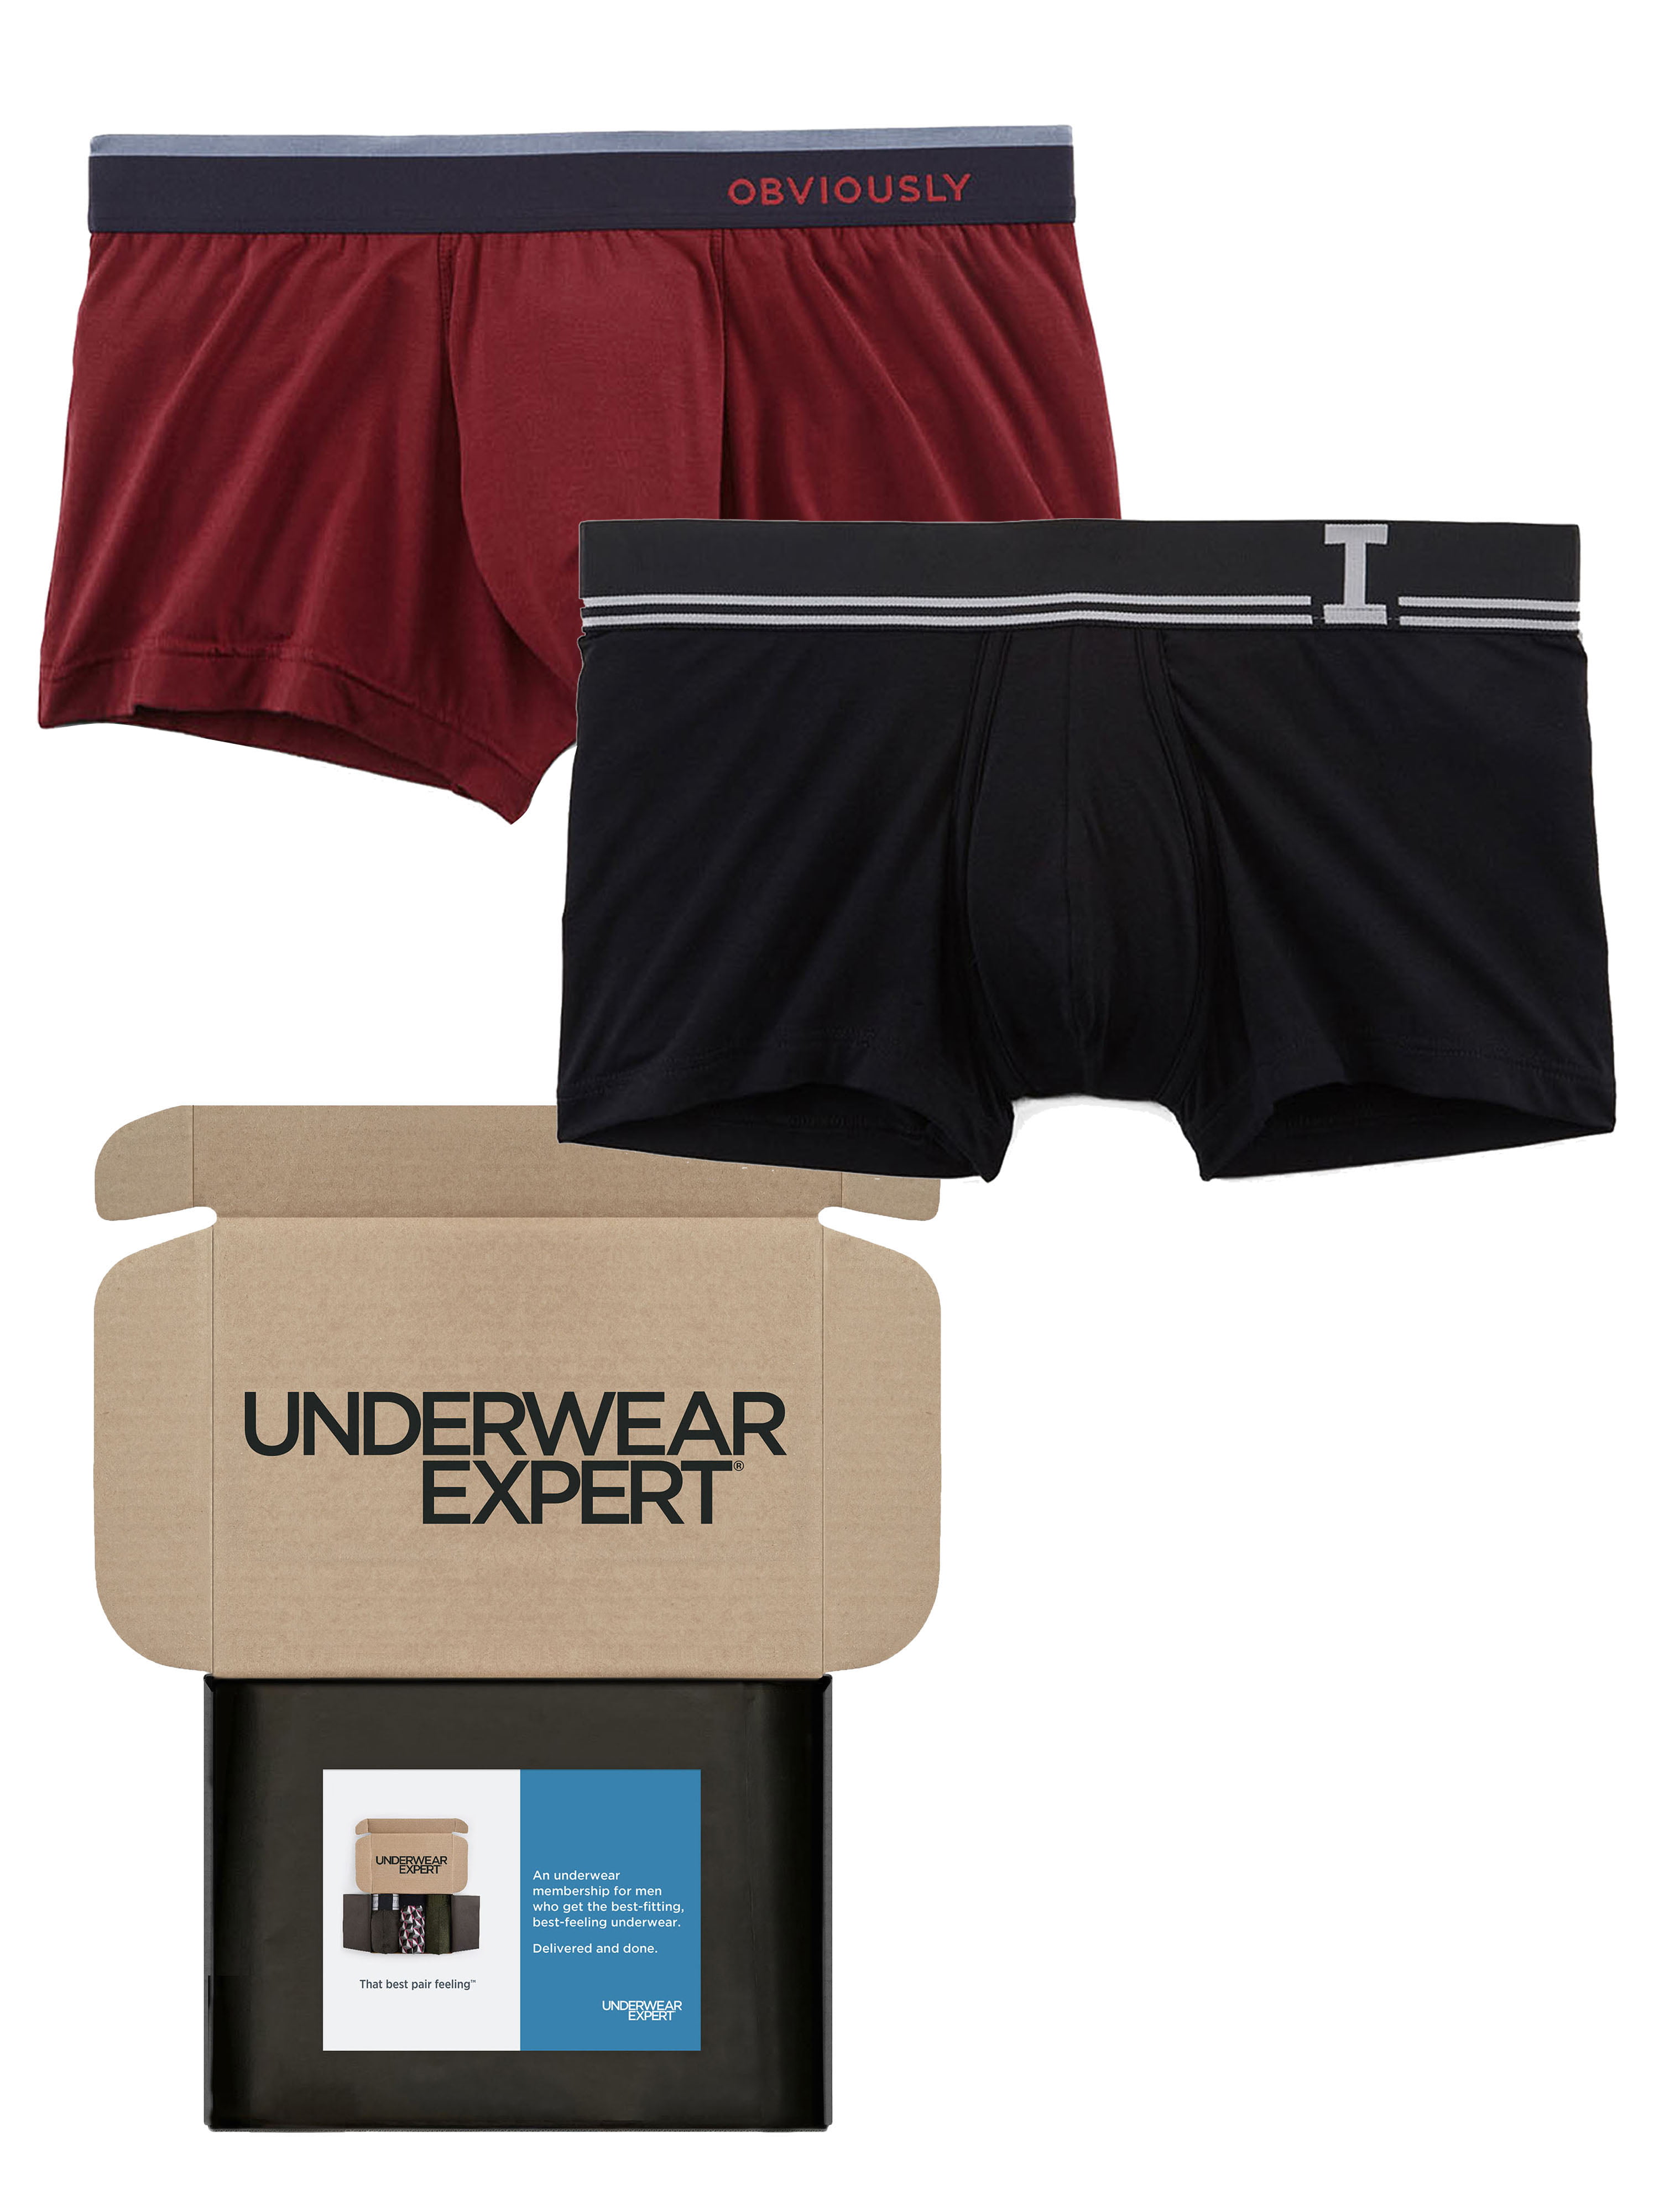 Underwear Expert Men's Trunks Curated Mystery Box, 2 Pairs